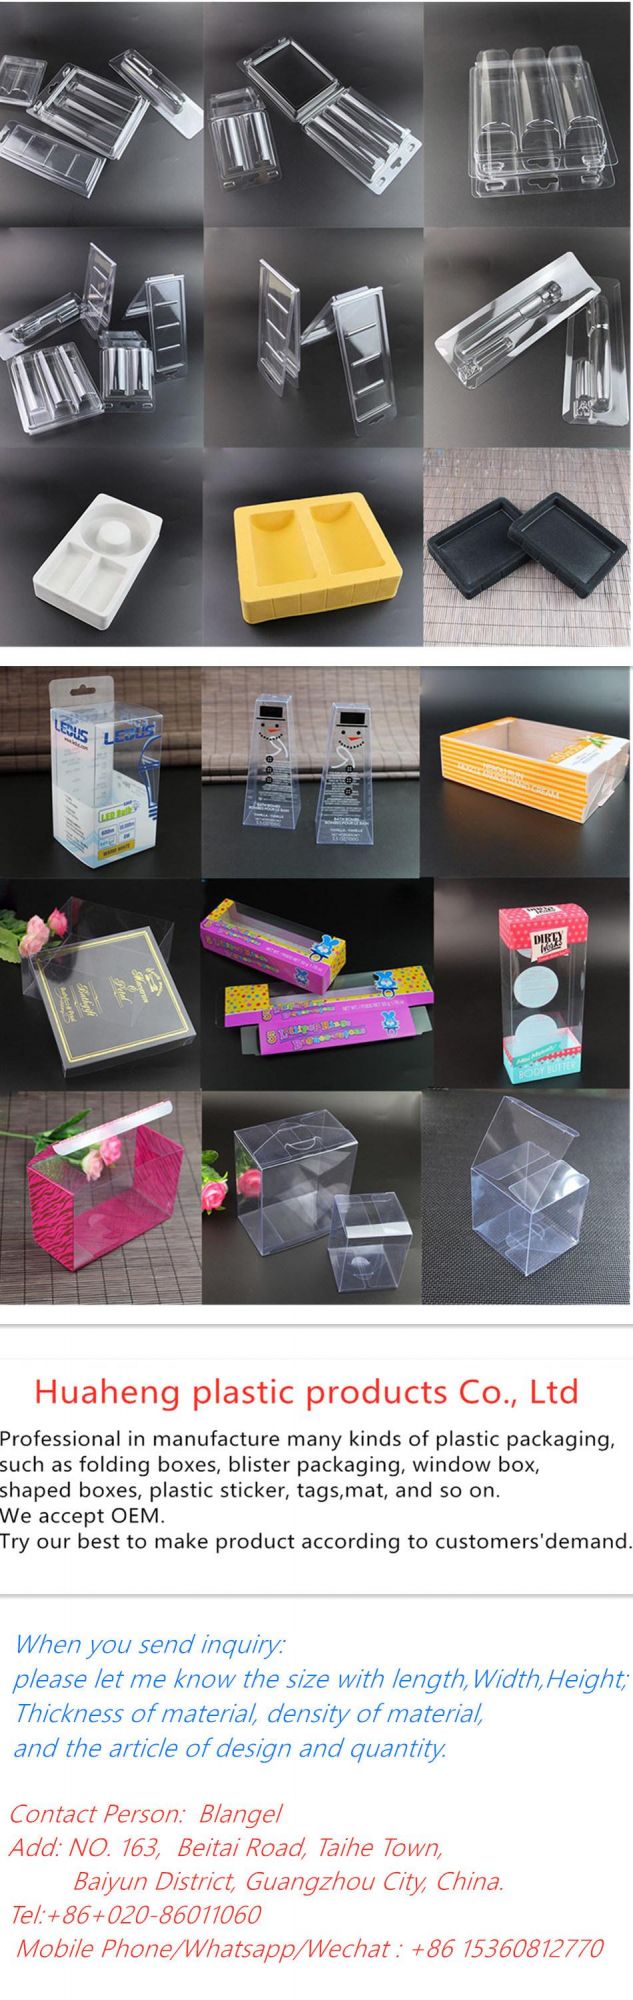 China Manufacturer Customized Gift Box For Dulex Condom (Sexy Toy packaging)